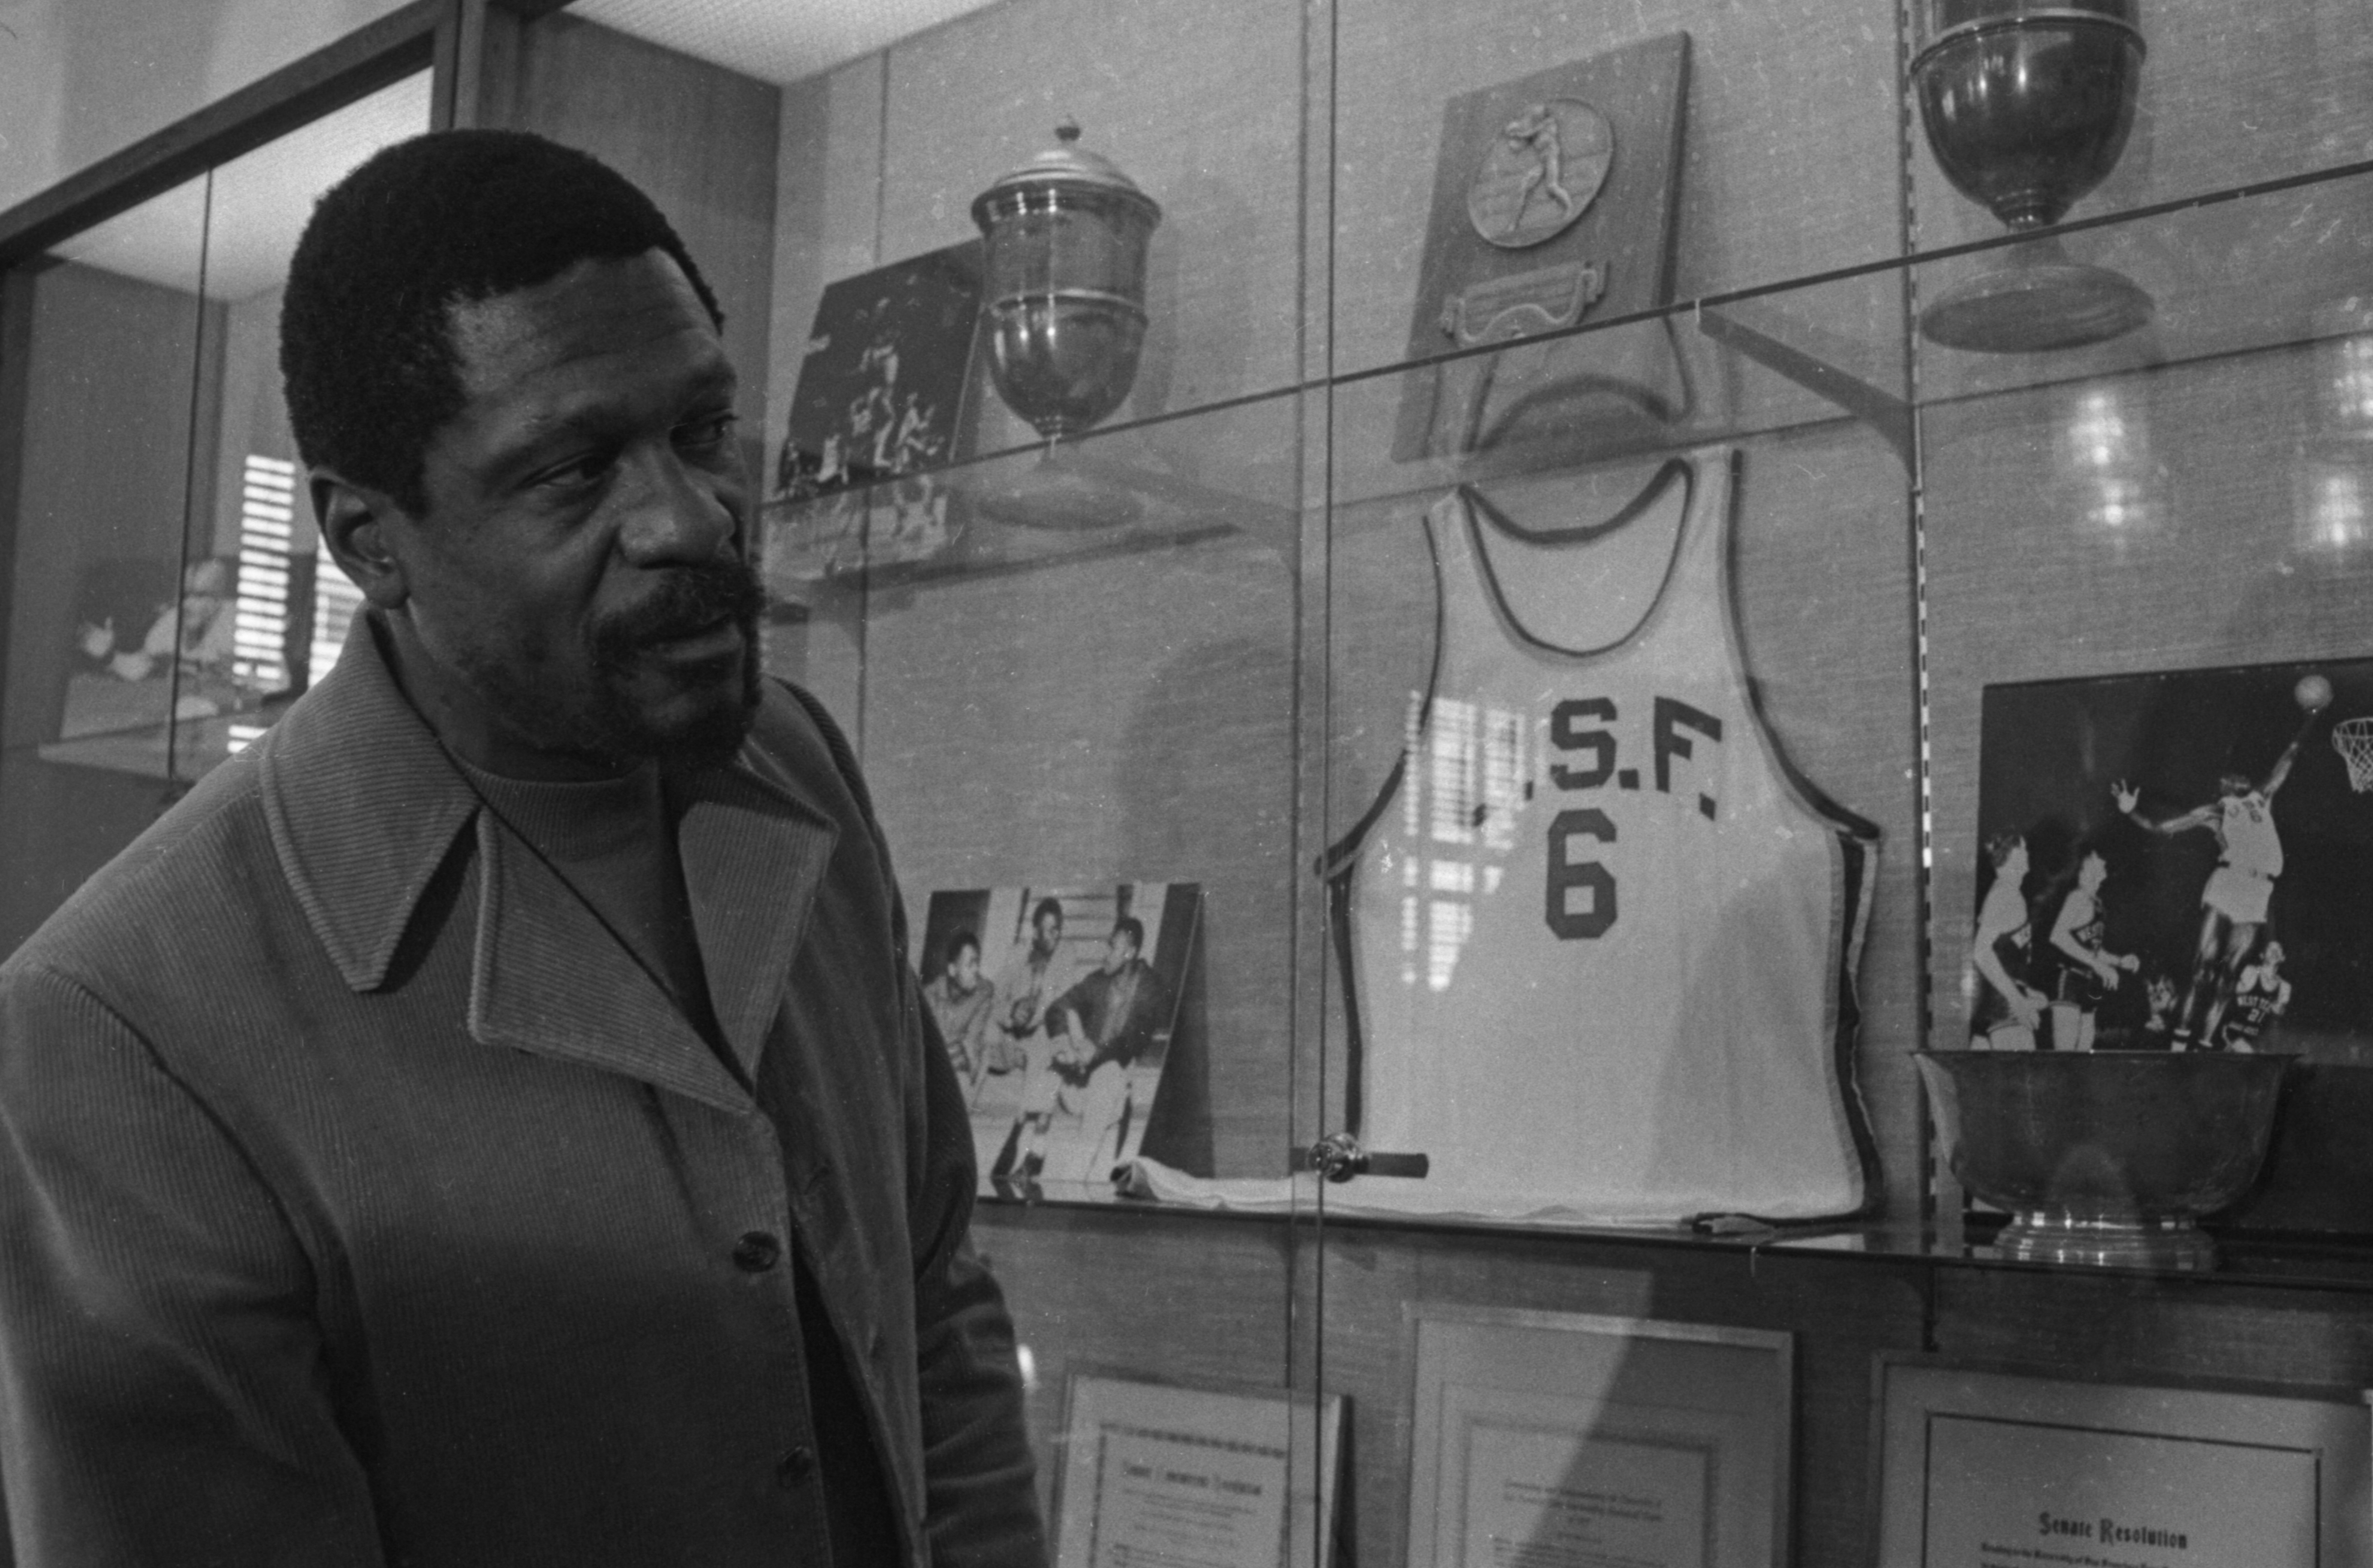 Bill Russell stands next to an old jersey 